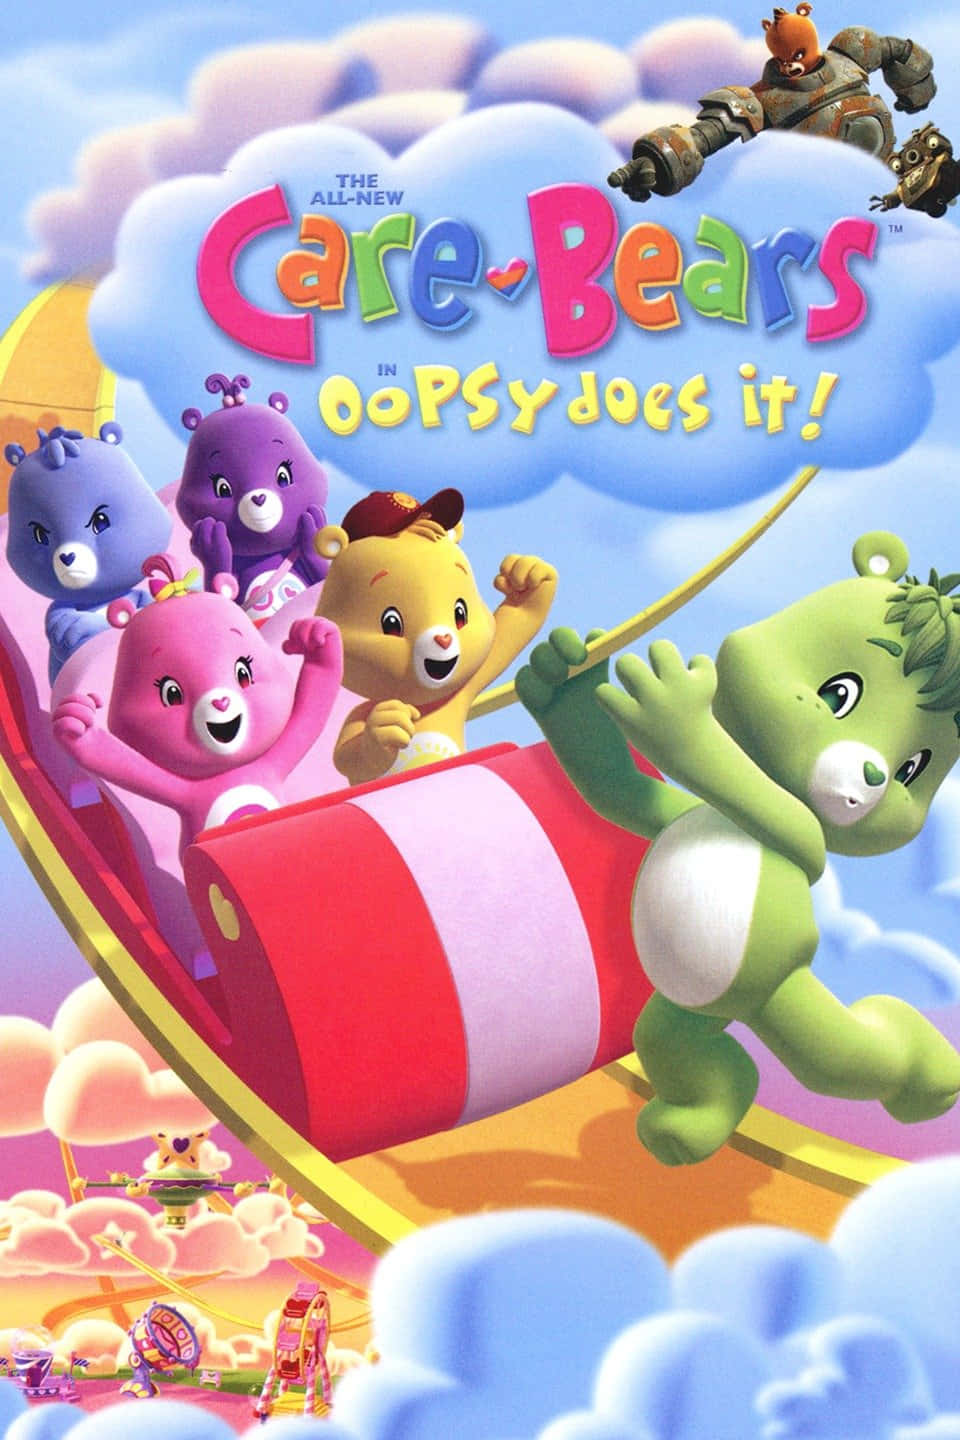 Care-a-Lot is the home of the Care Bears